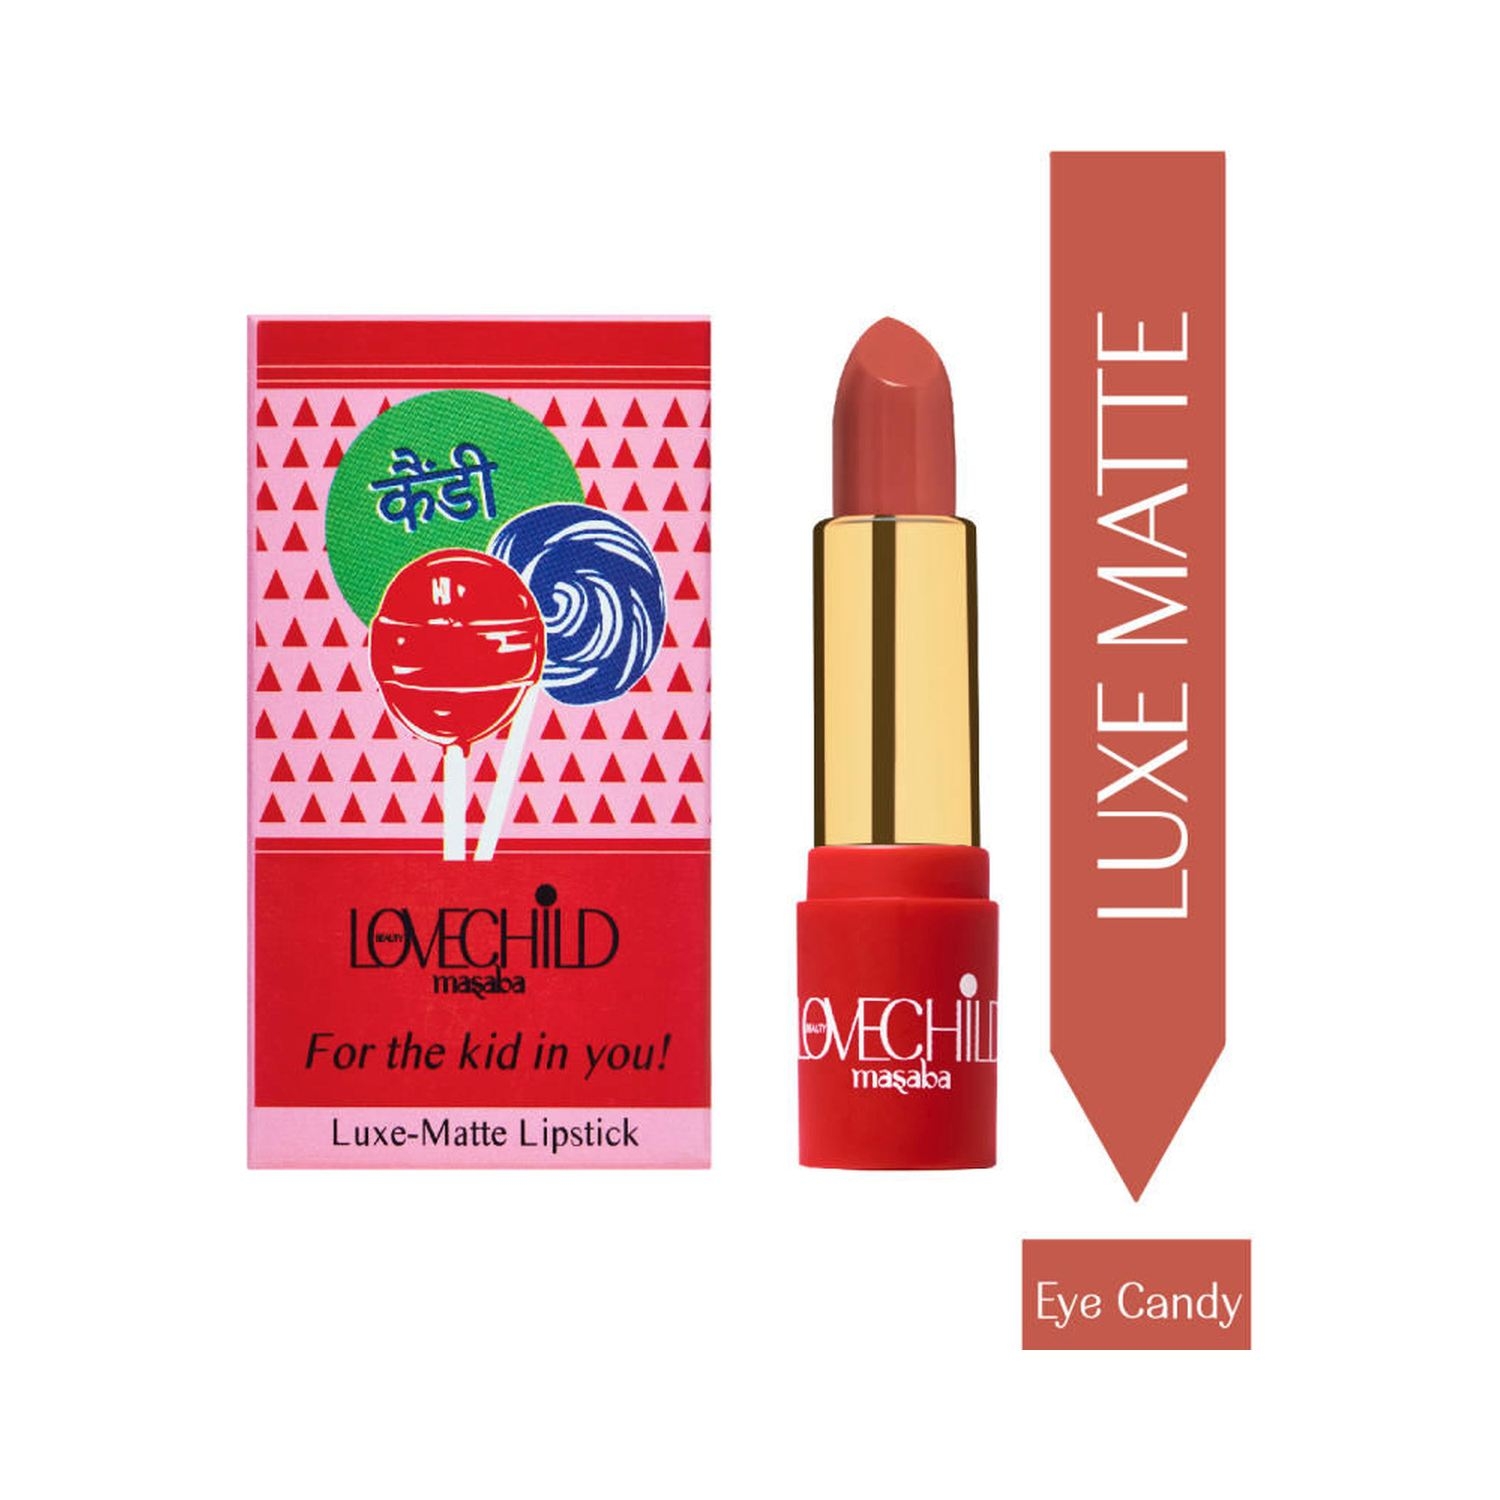 LoveChild Masaba | LoveChild Masaba For The Kid In You! Luxe Matte Lipstick - 01 Eye-Candy (4g)